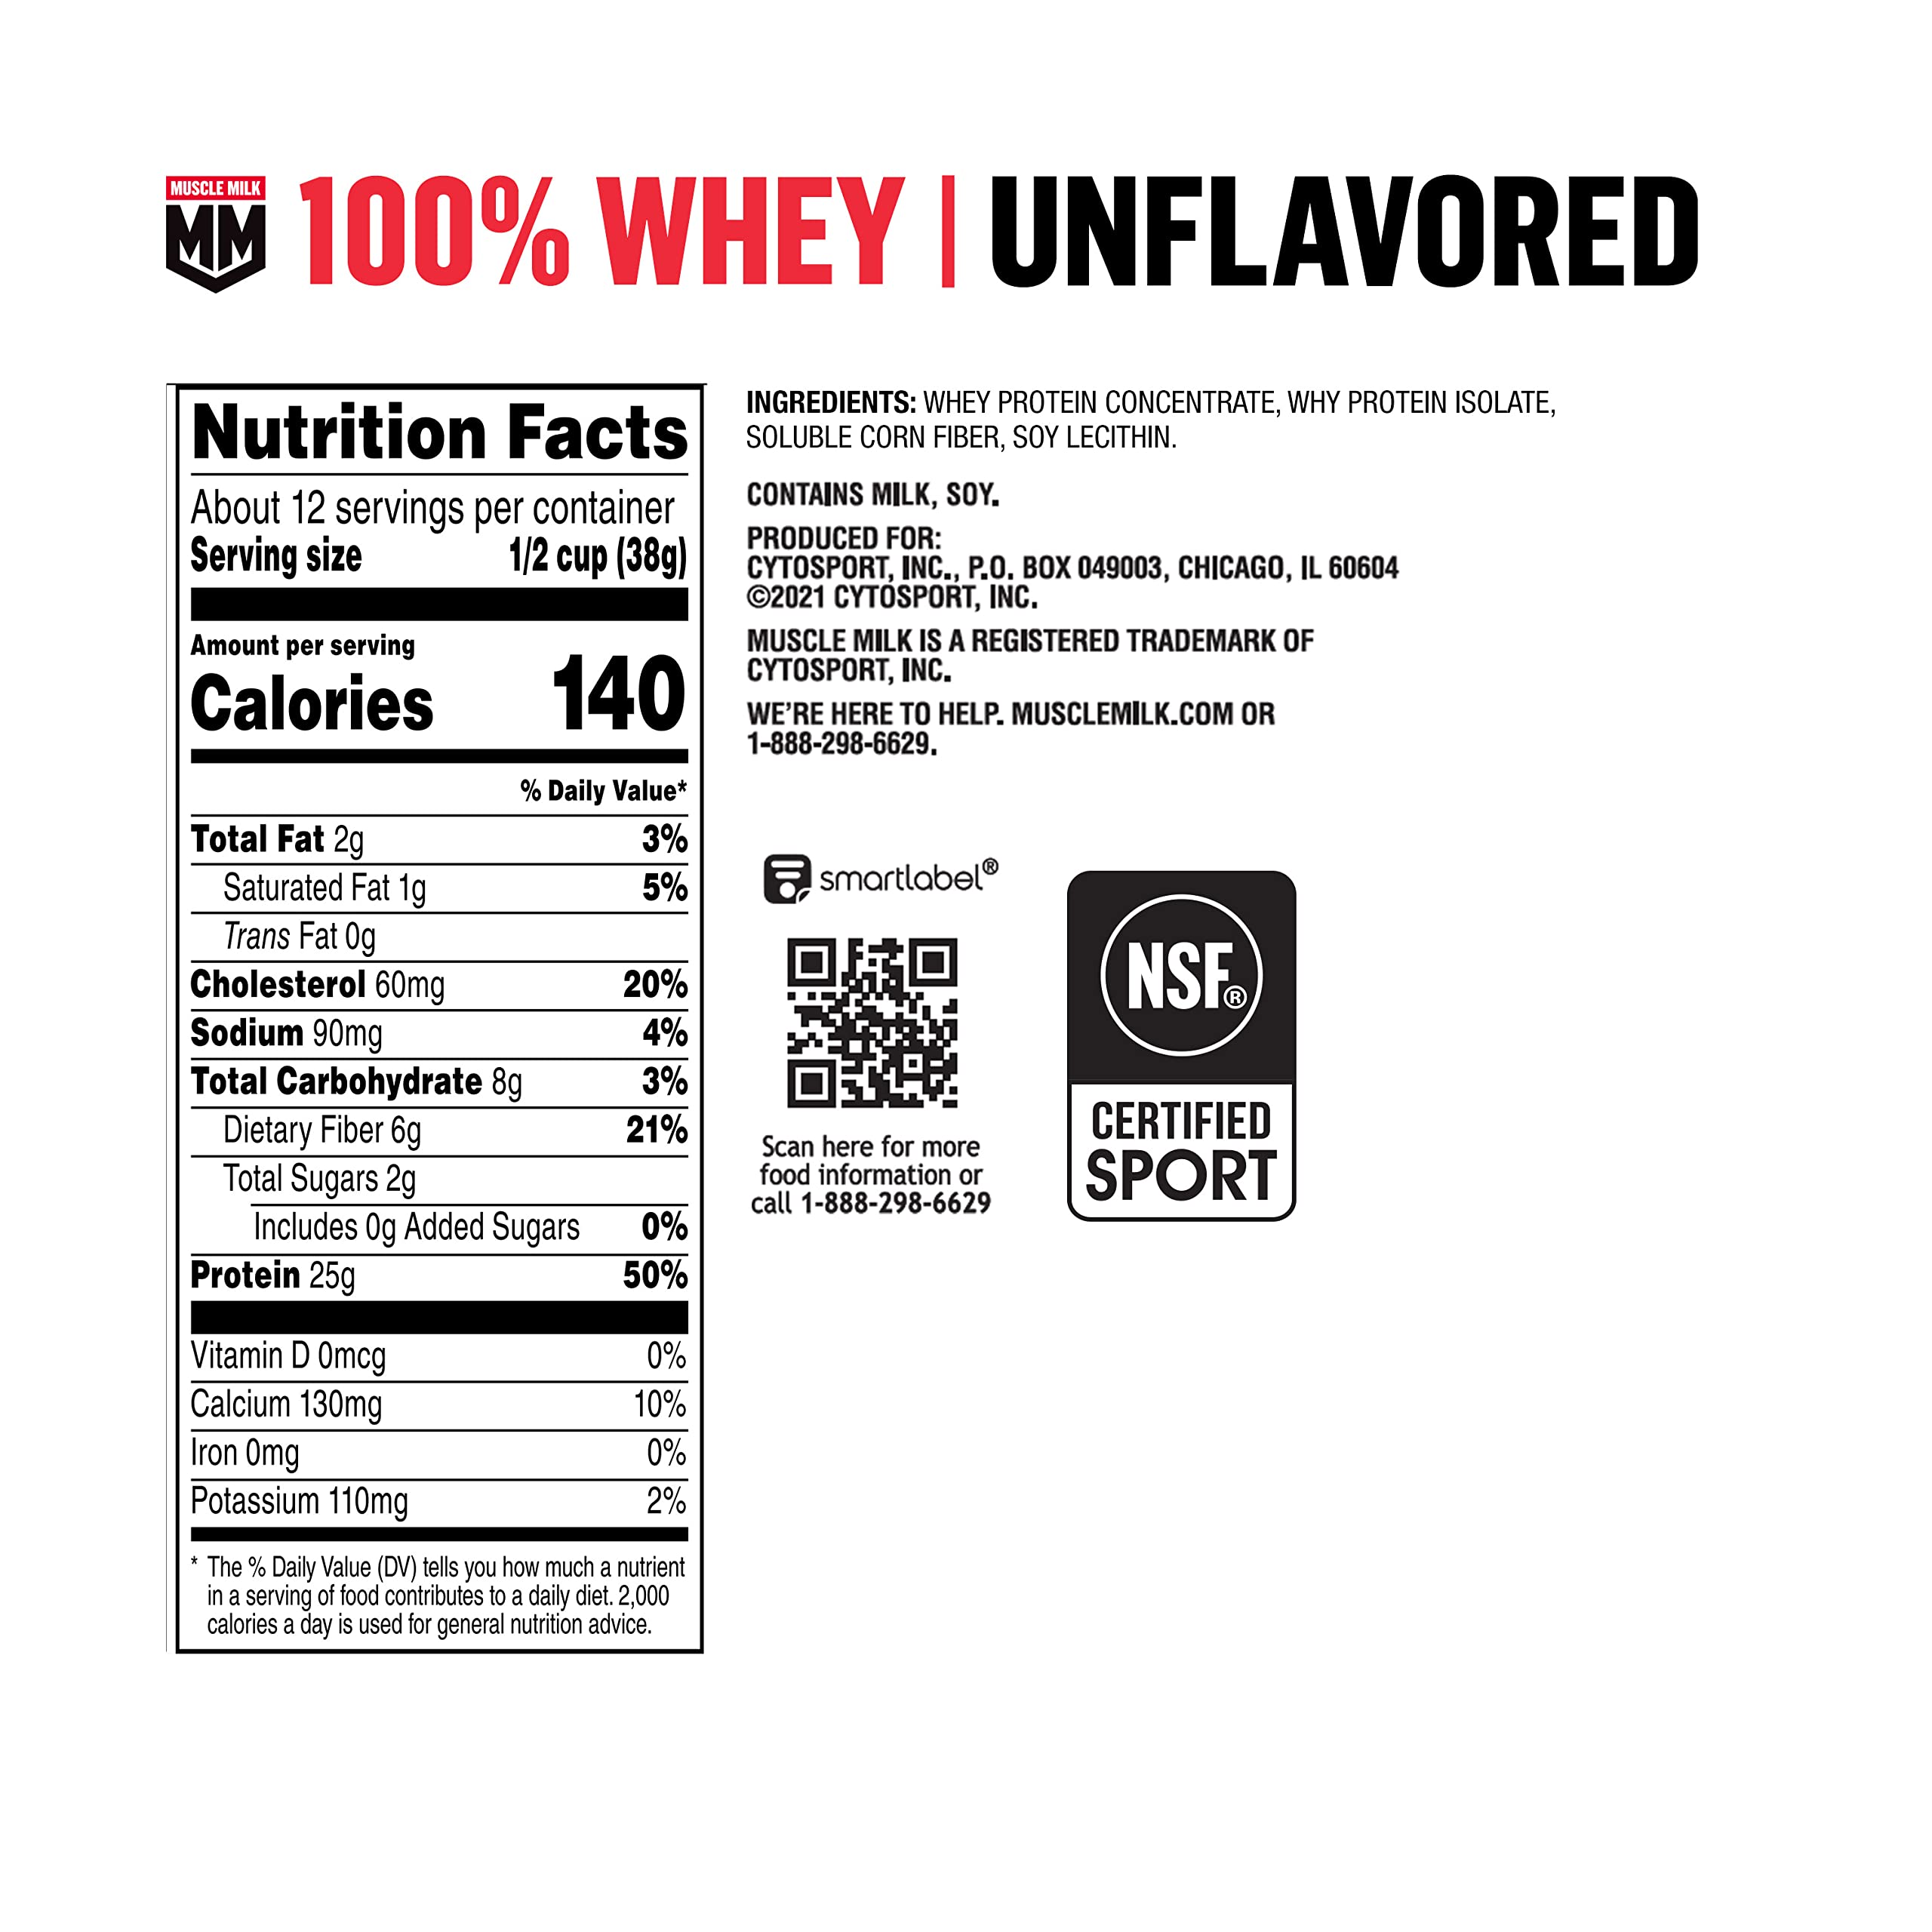 Muscle Milk 100% Whey Protein Powder, Unflavored, 1 Pound, 12 Servings, 25g Protein, 6g Fiber, No Added Sweeteners, No Added Flavors, No Added Colors, NSF Certified for Sport, Packaging May Vary